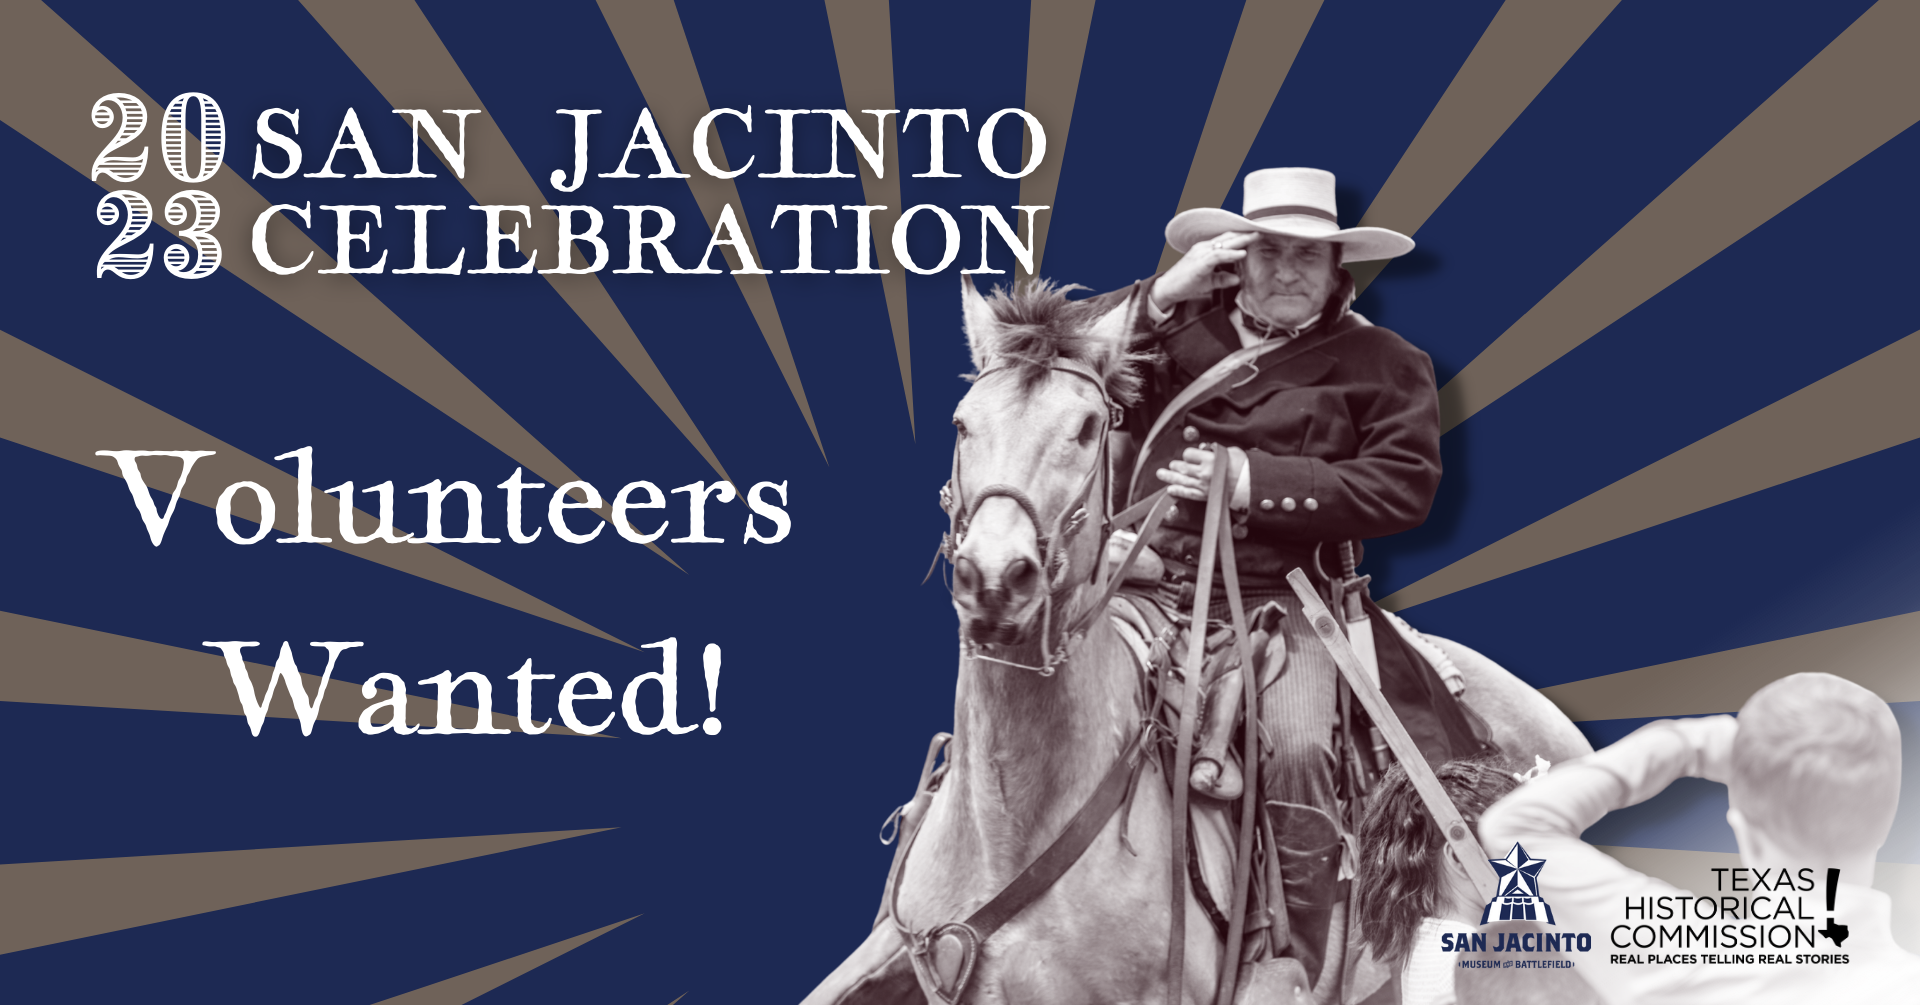 A promotional image requesting volunteers for San Jacinto Day